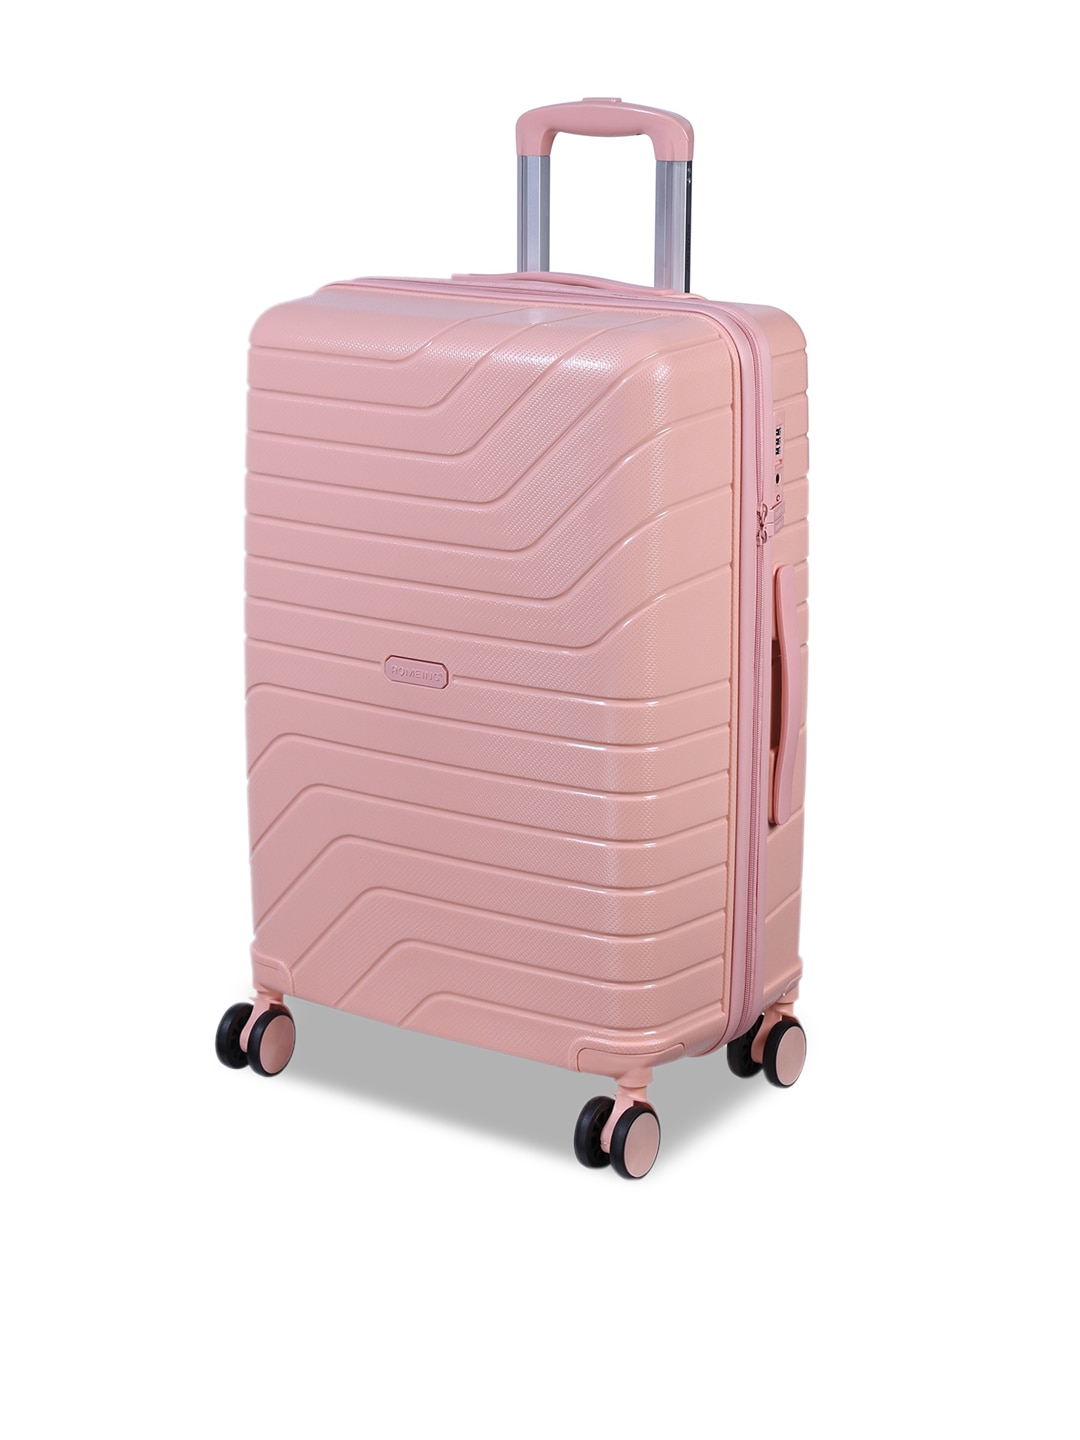 ROMEING Tuscany Pink Textured Hard Sided Polypropylene Medium Trolley Suitcase Price in India